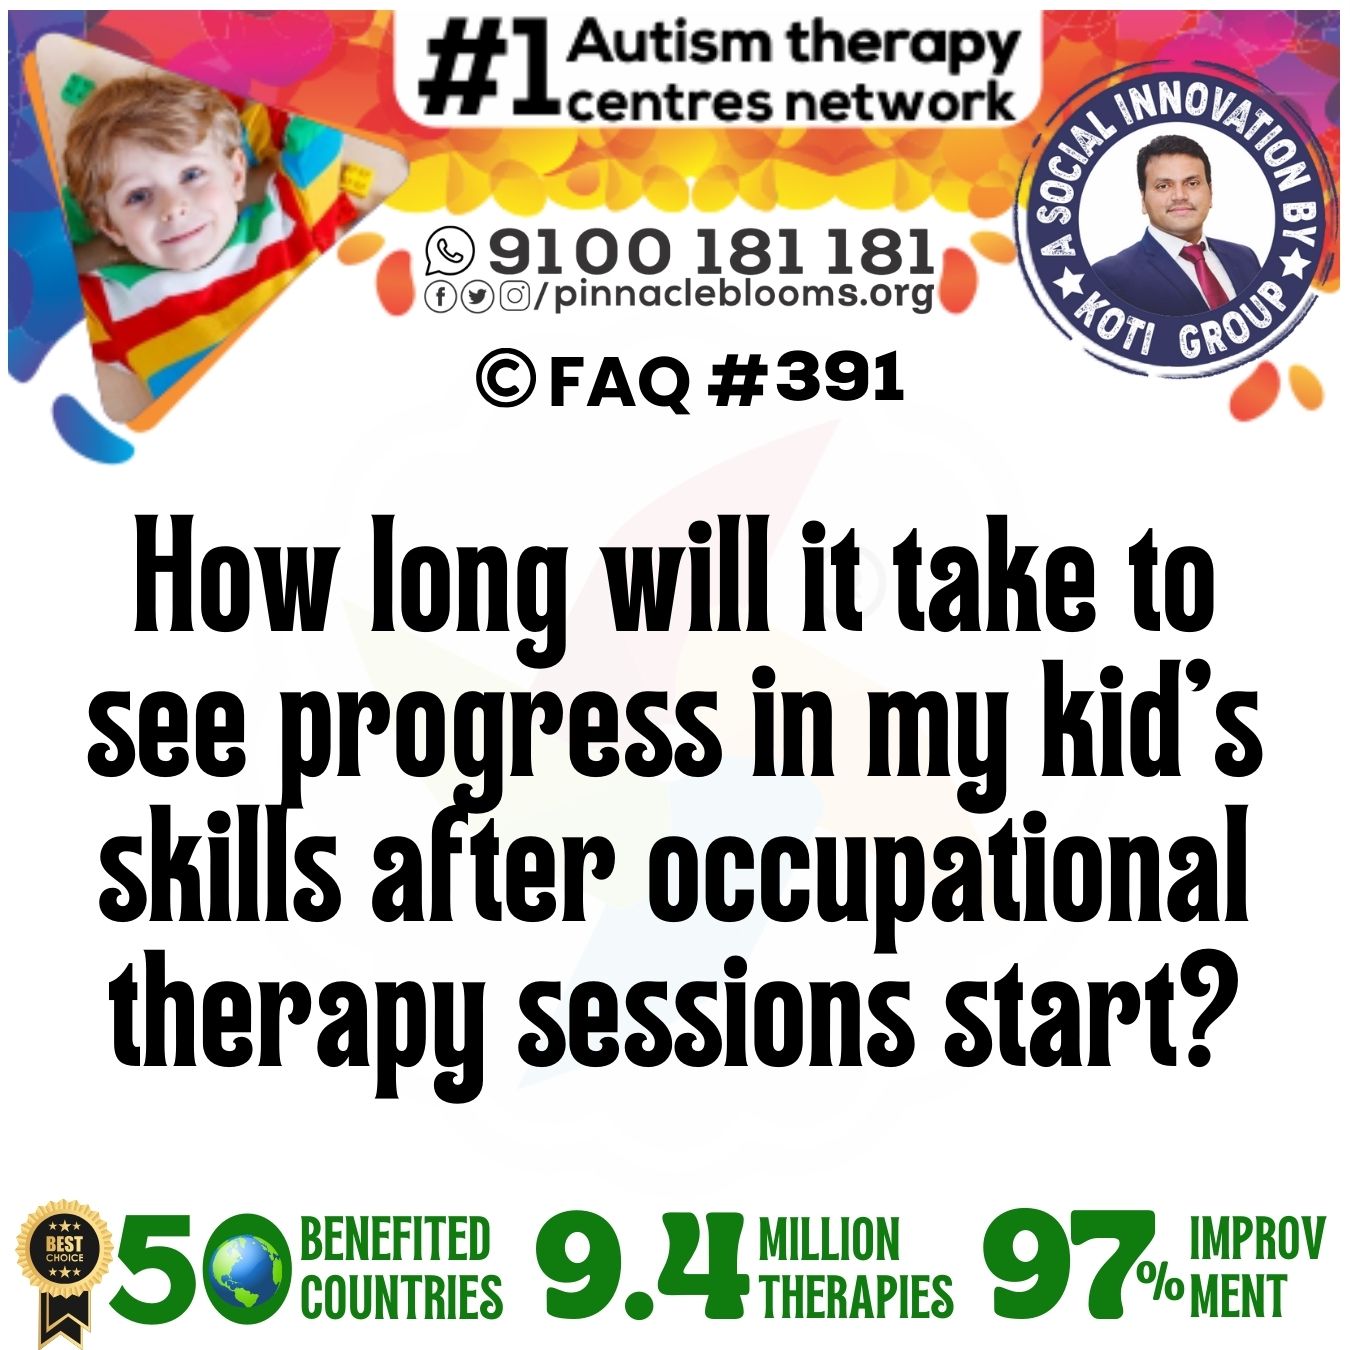 How long will it take to see progress in my kid’s skills after occupational therapy sessions start?